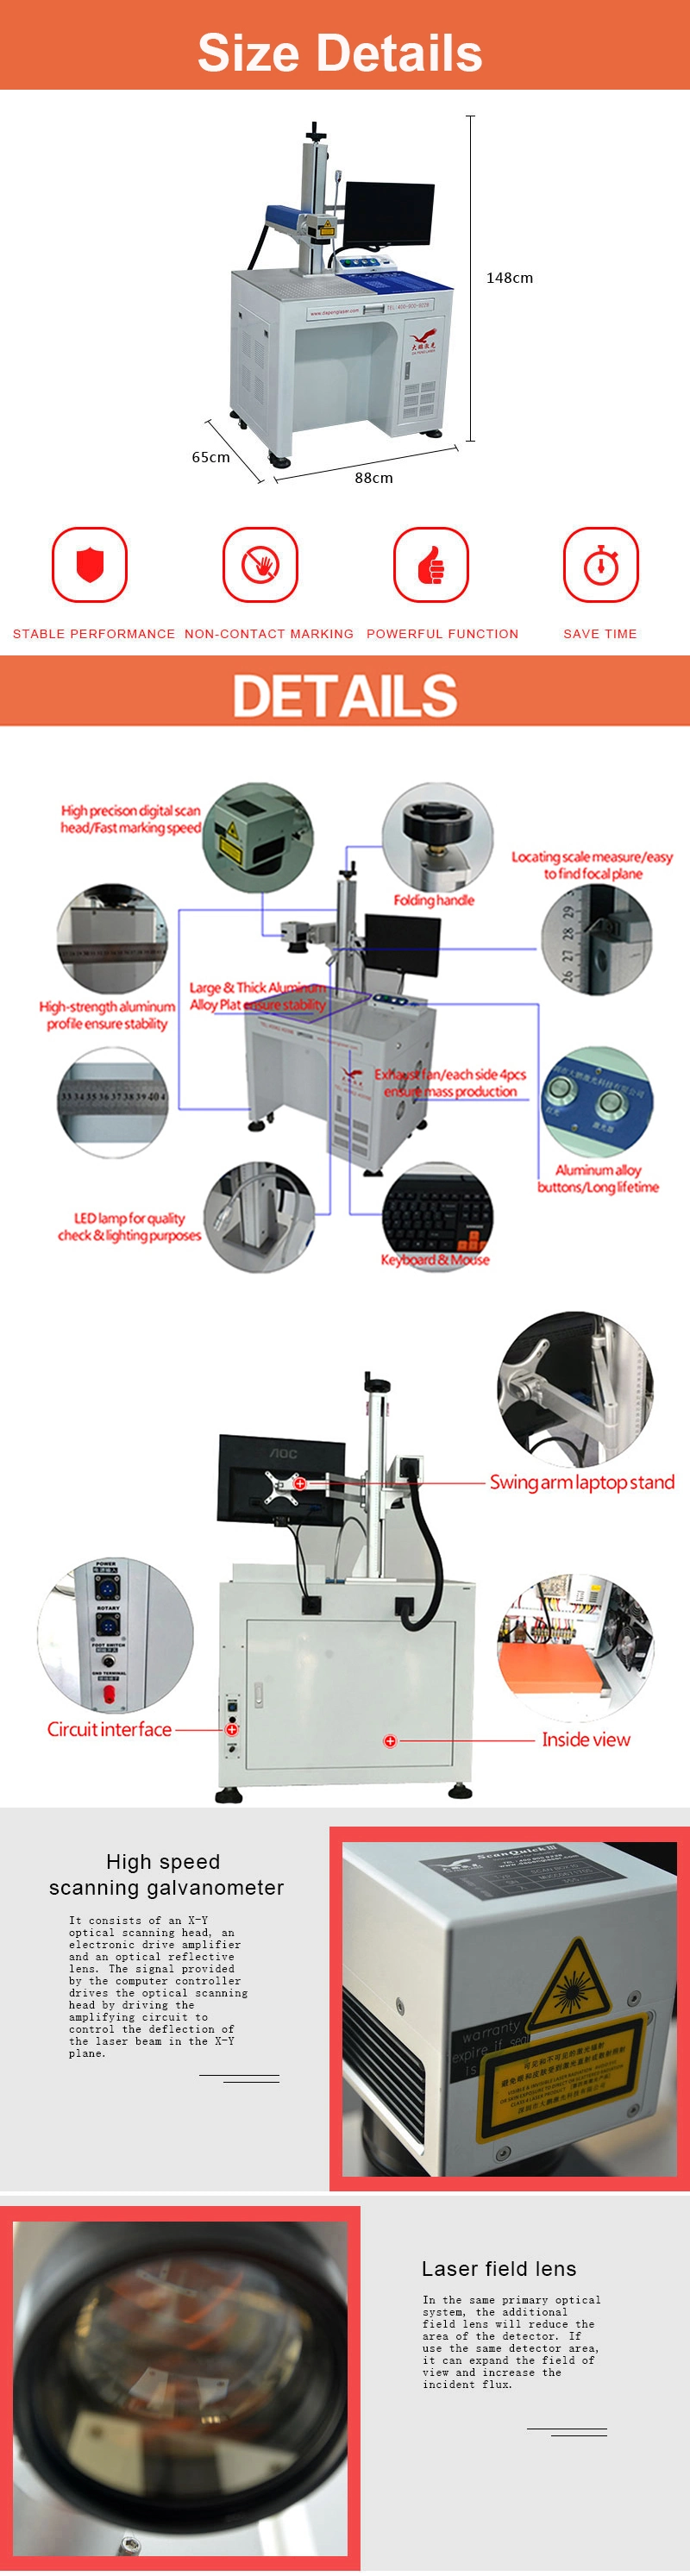 Conpetitive Price Fiber Laser Marking Machine with 20W/30W/50W for Marking on Metal Materails